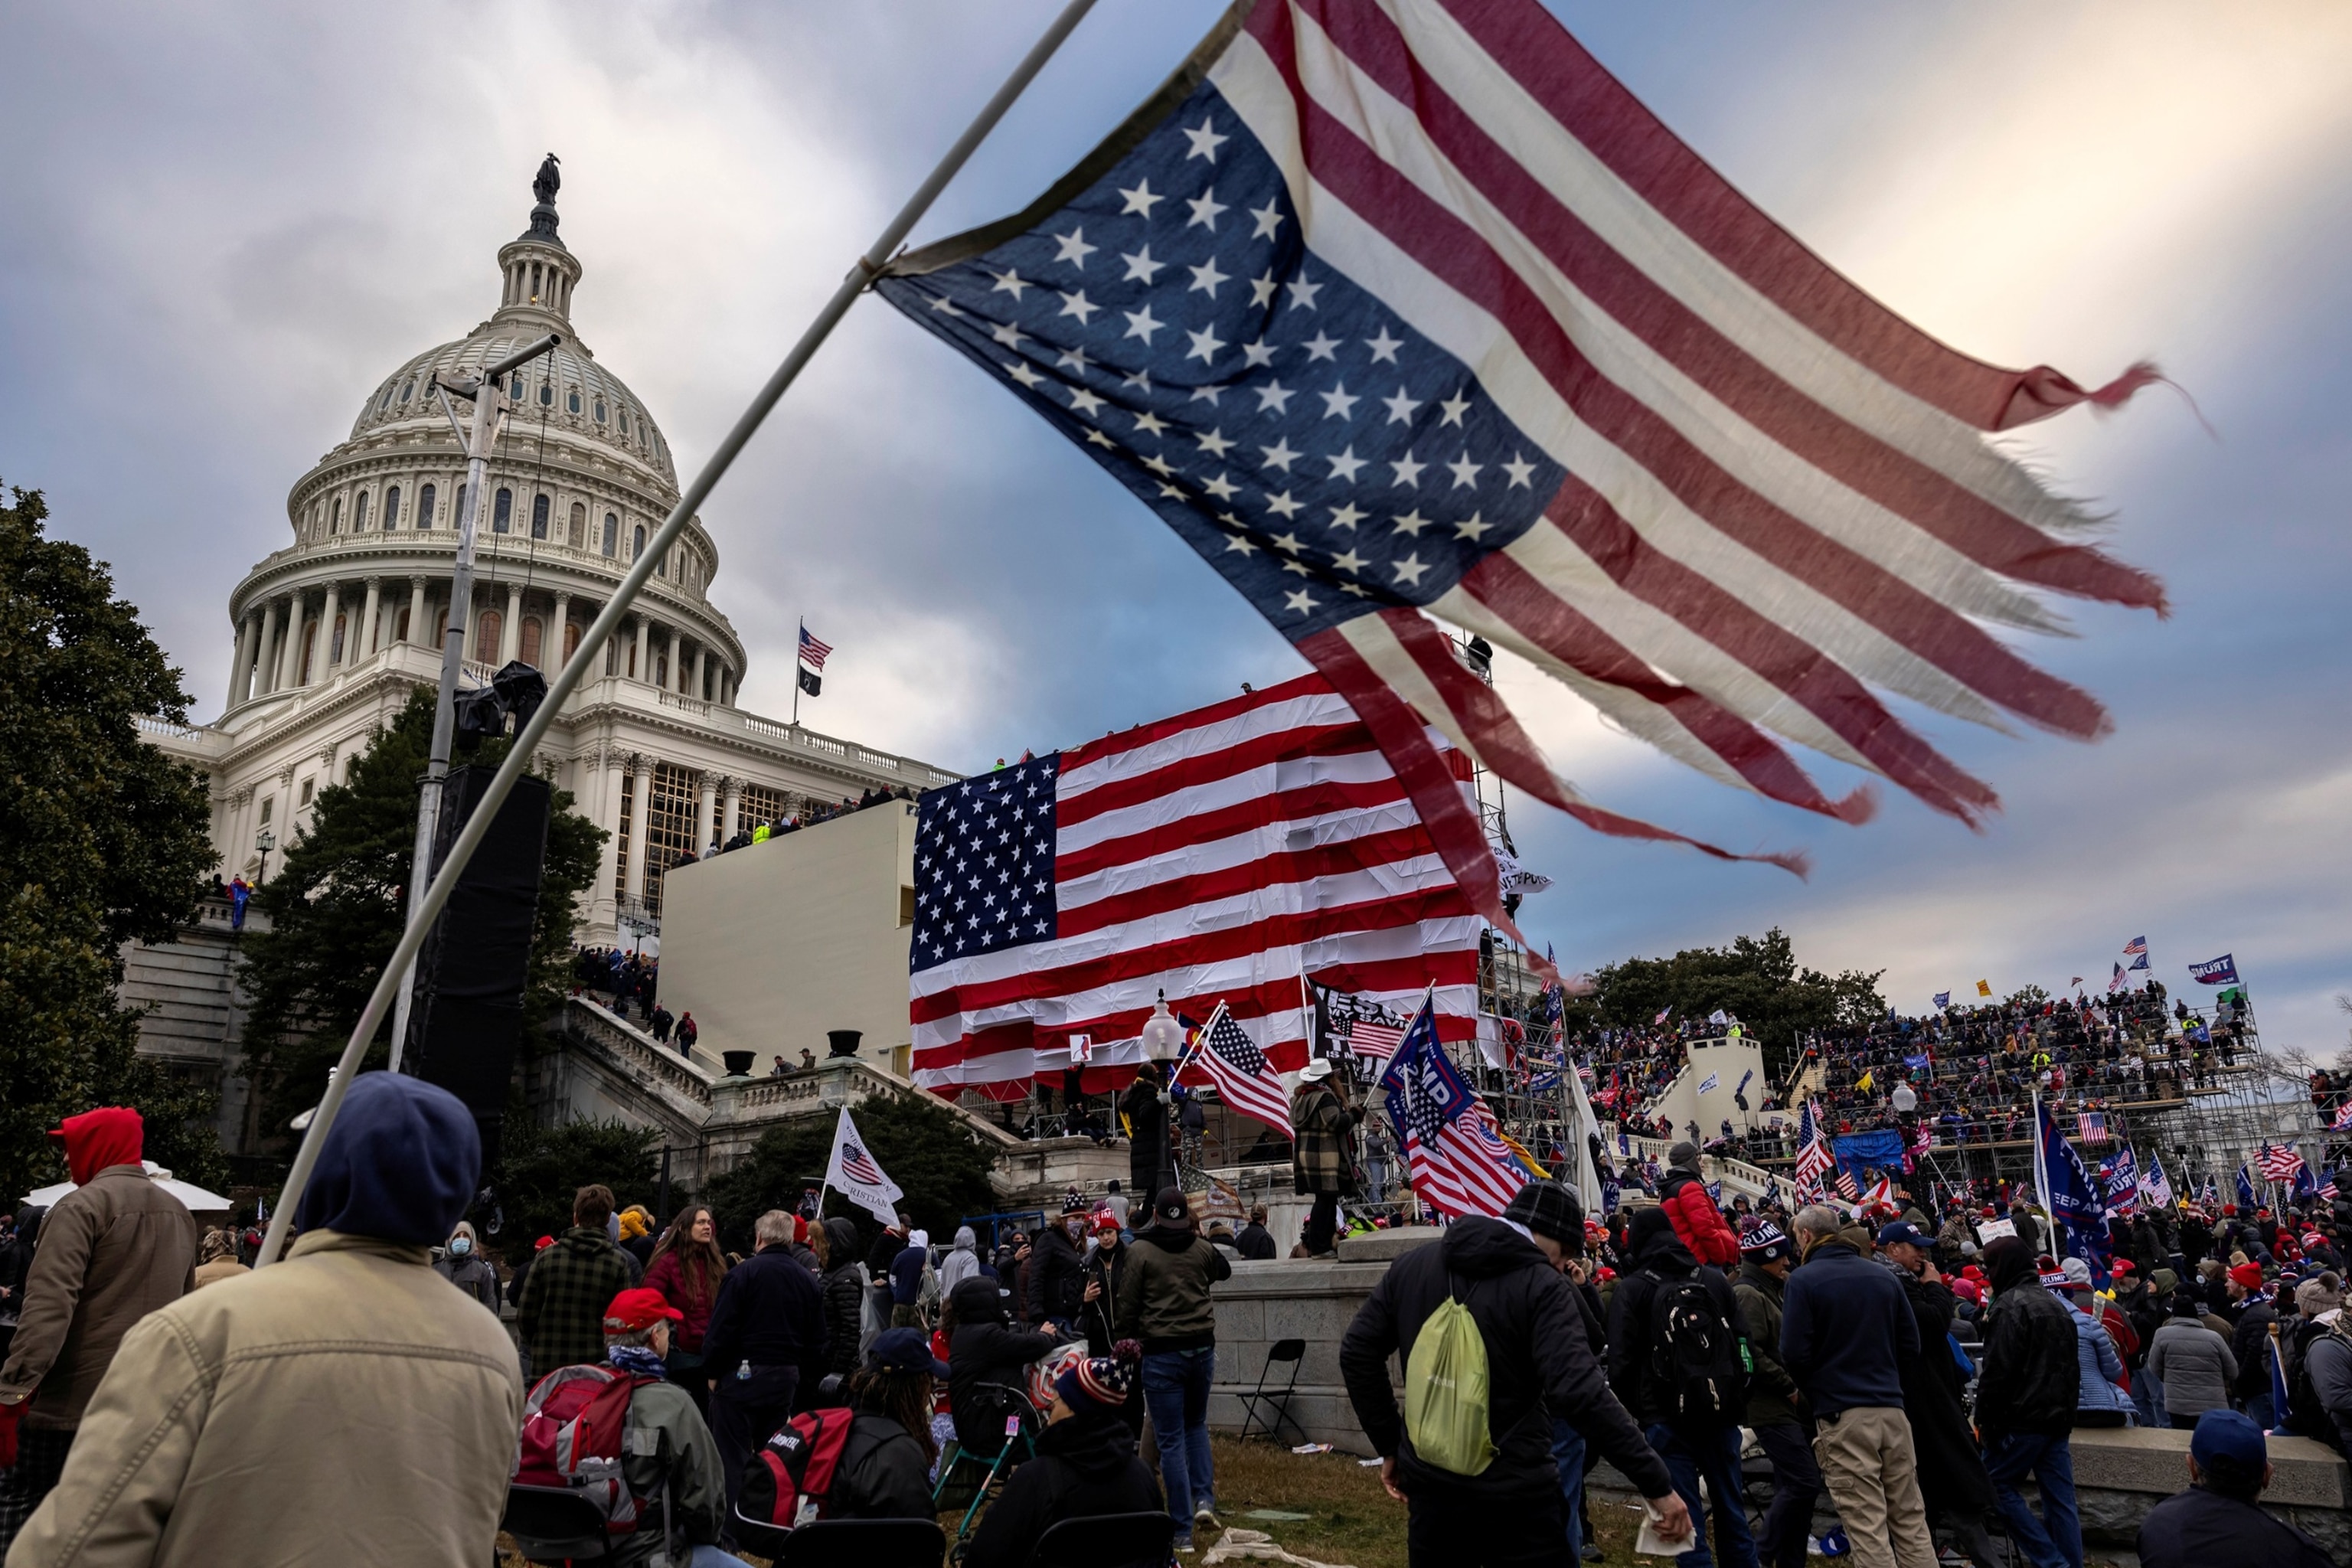 PHOTO: Pro-Trump protesters gather in front of the U.S. Capitol Building, on Jan. 6, 2021, in Washington, D.C.